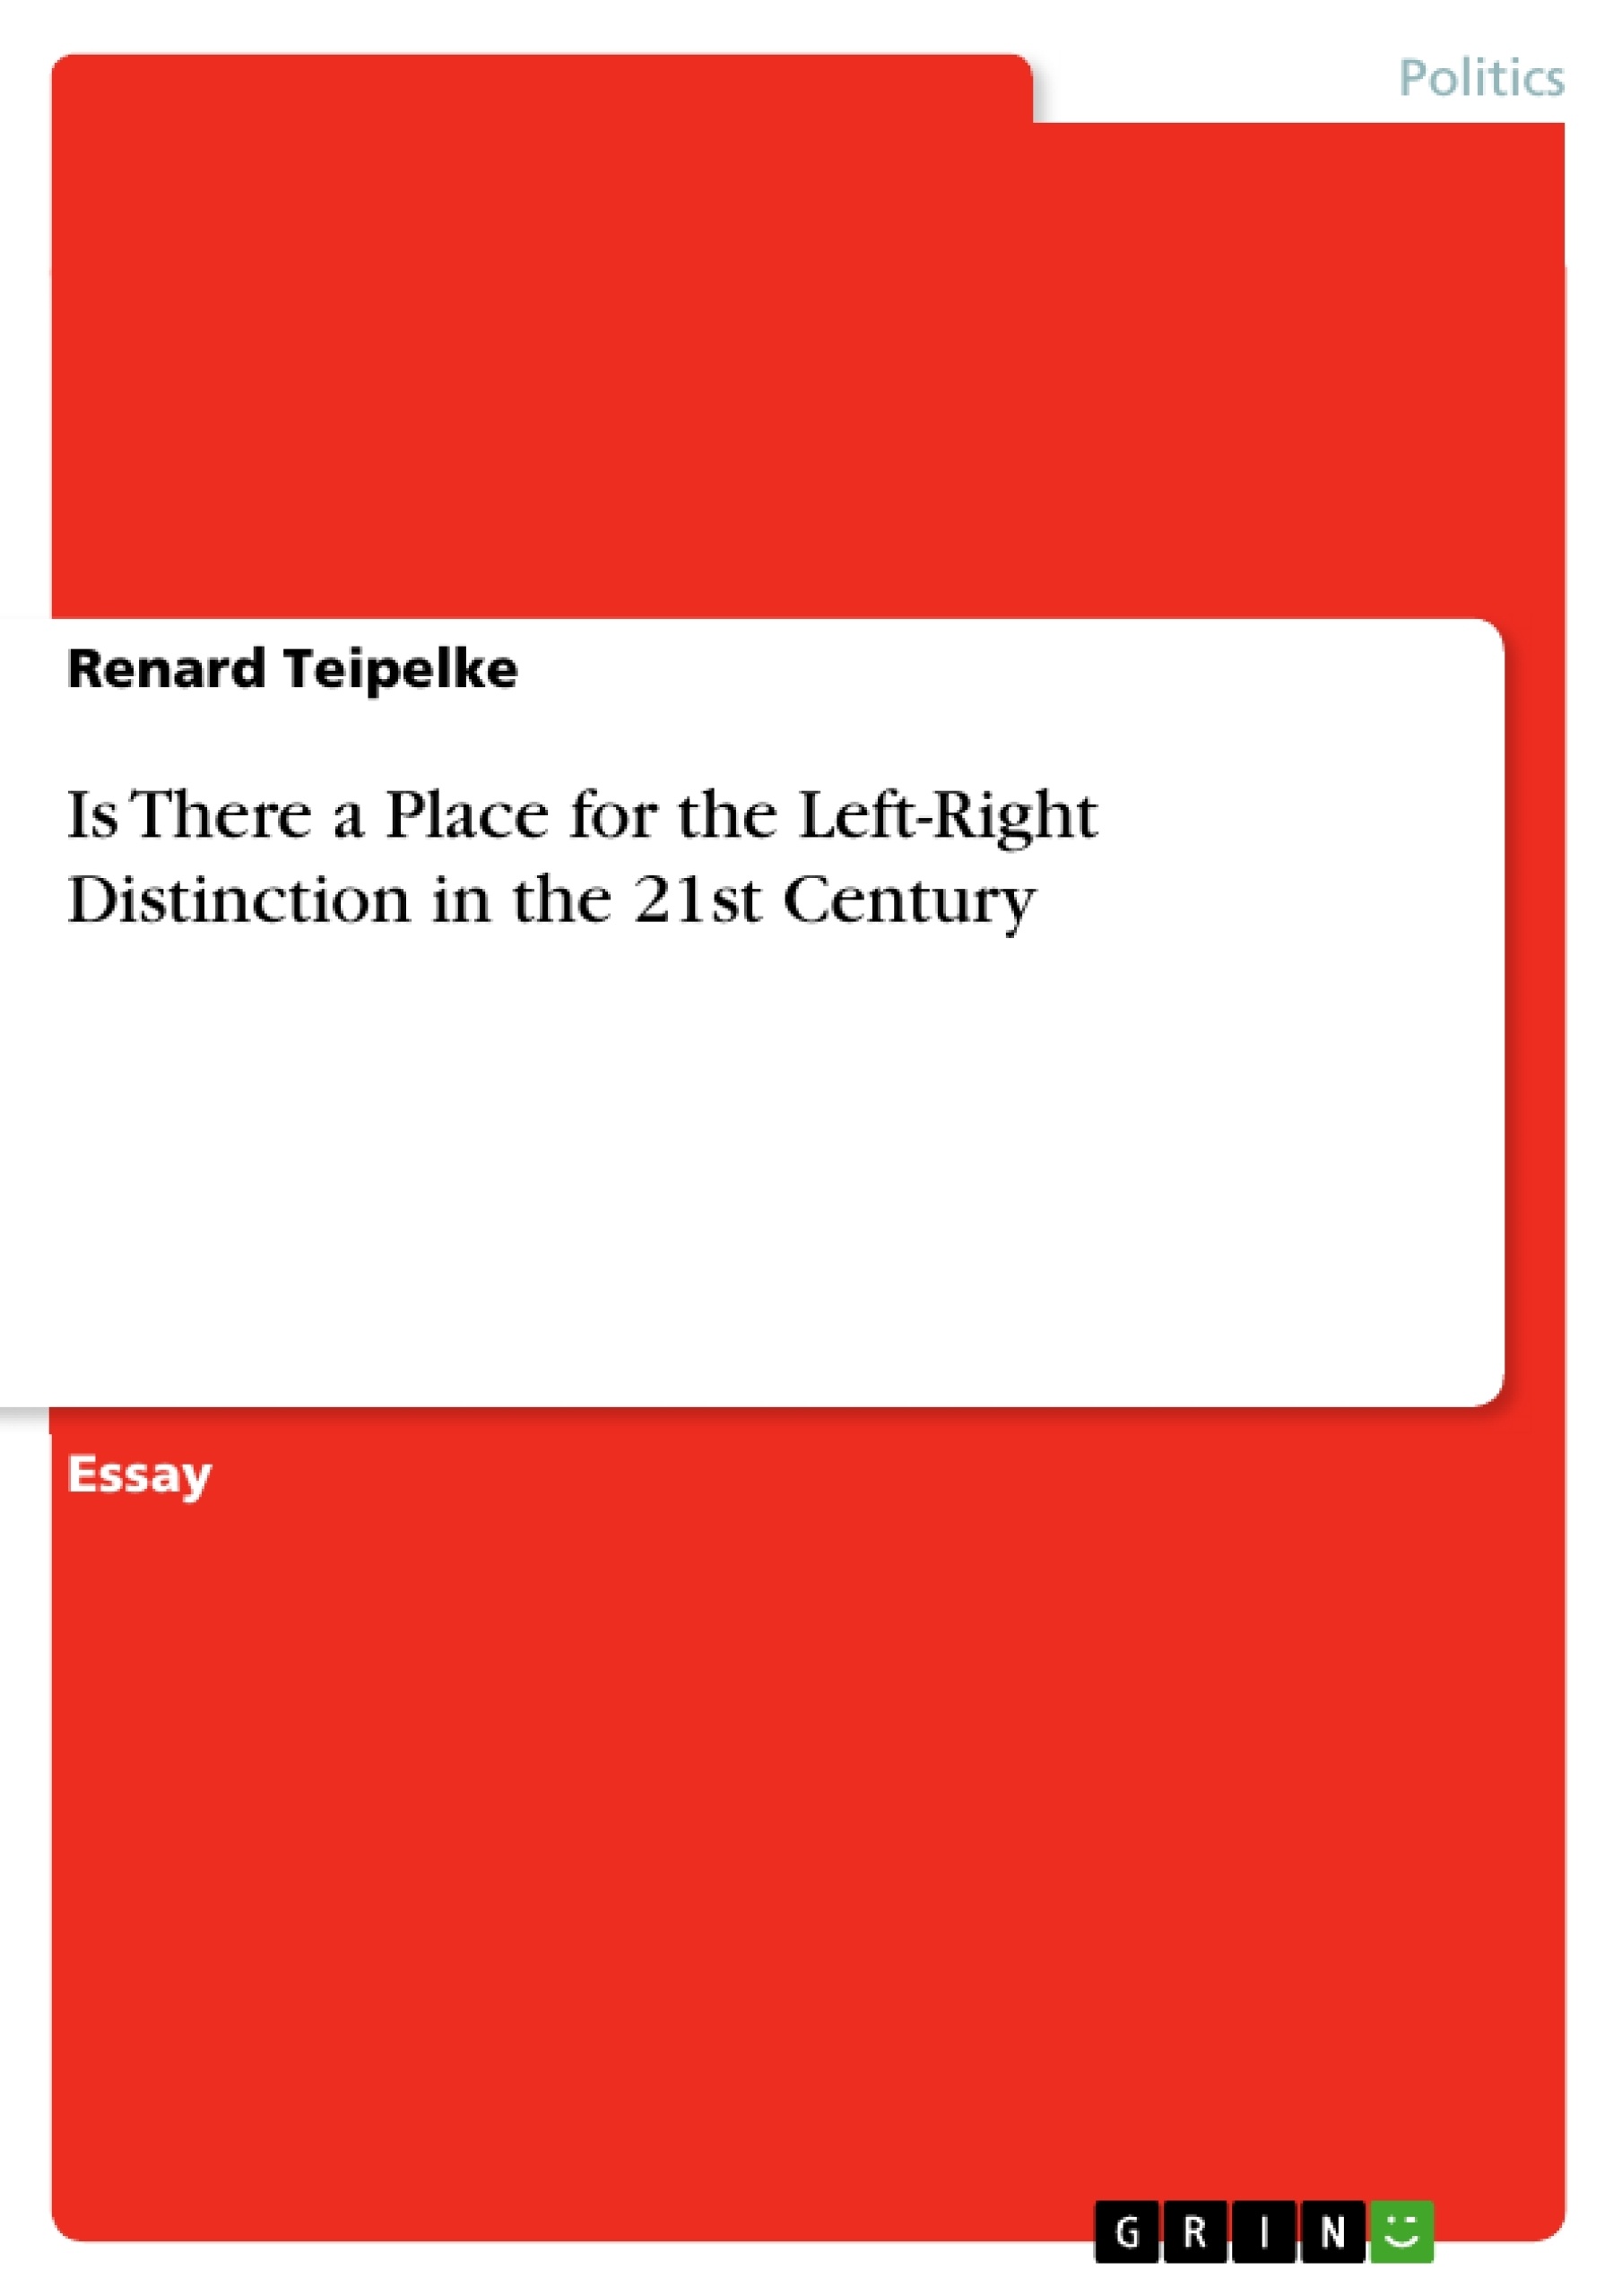 Title: Is There a Place for the Left-Right Distinction in the 21st Century